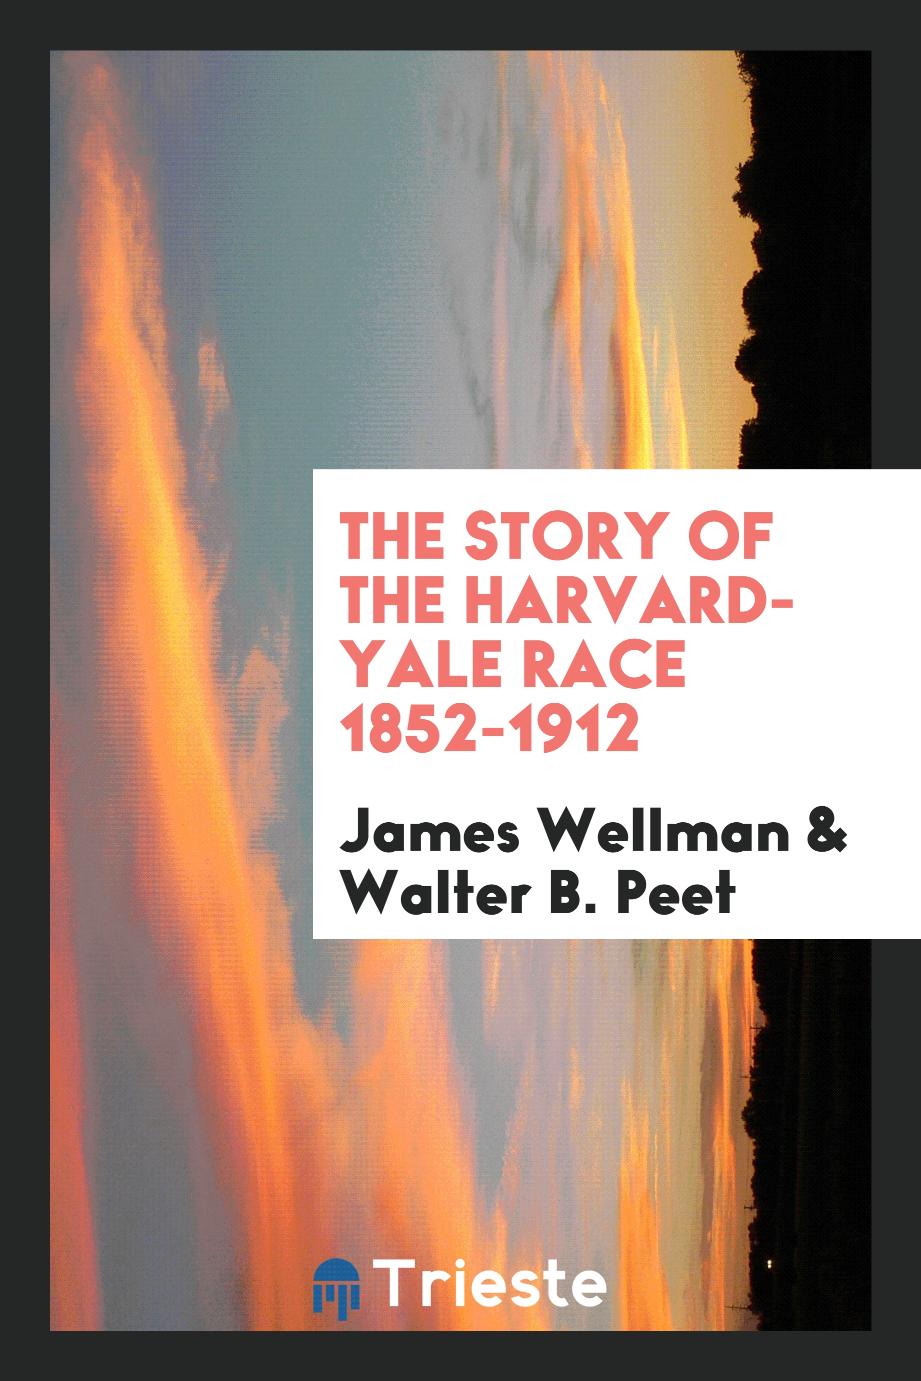 The Story of the Harvard-Yale race 1852-1912